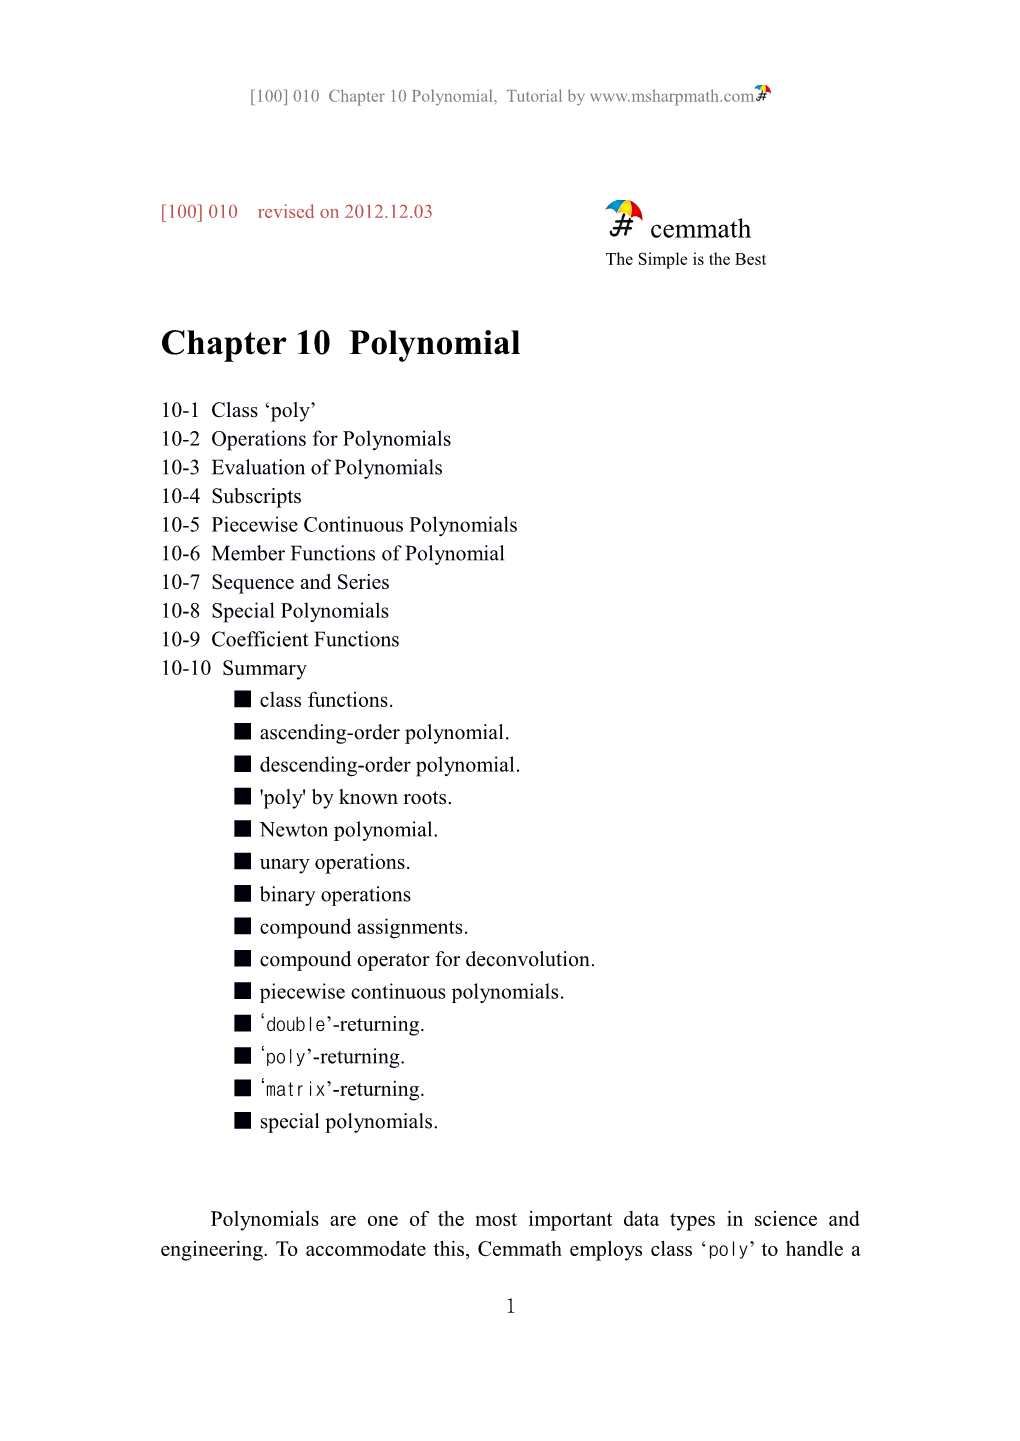 Chapter 10 Polynomial